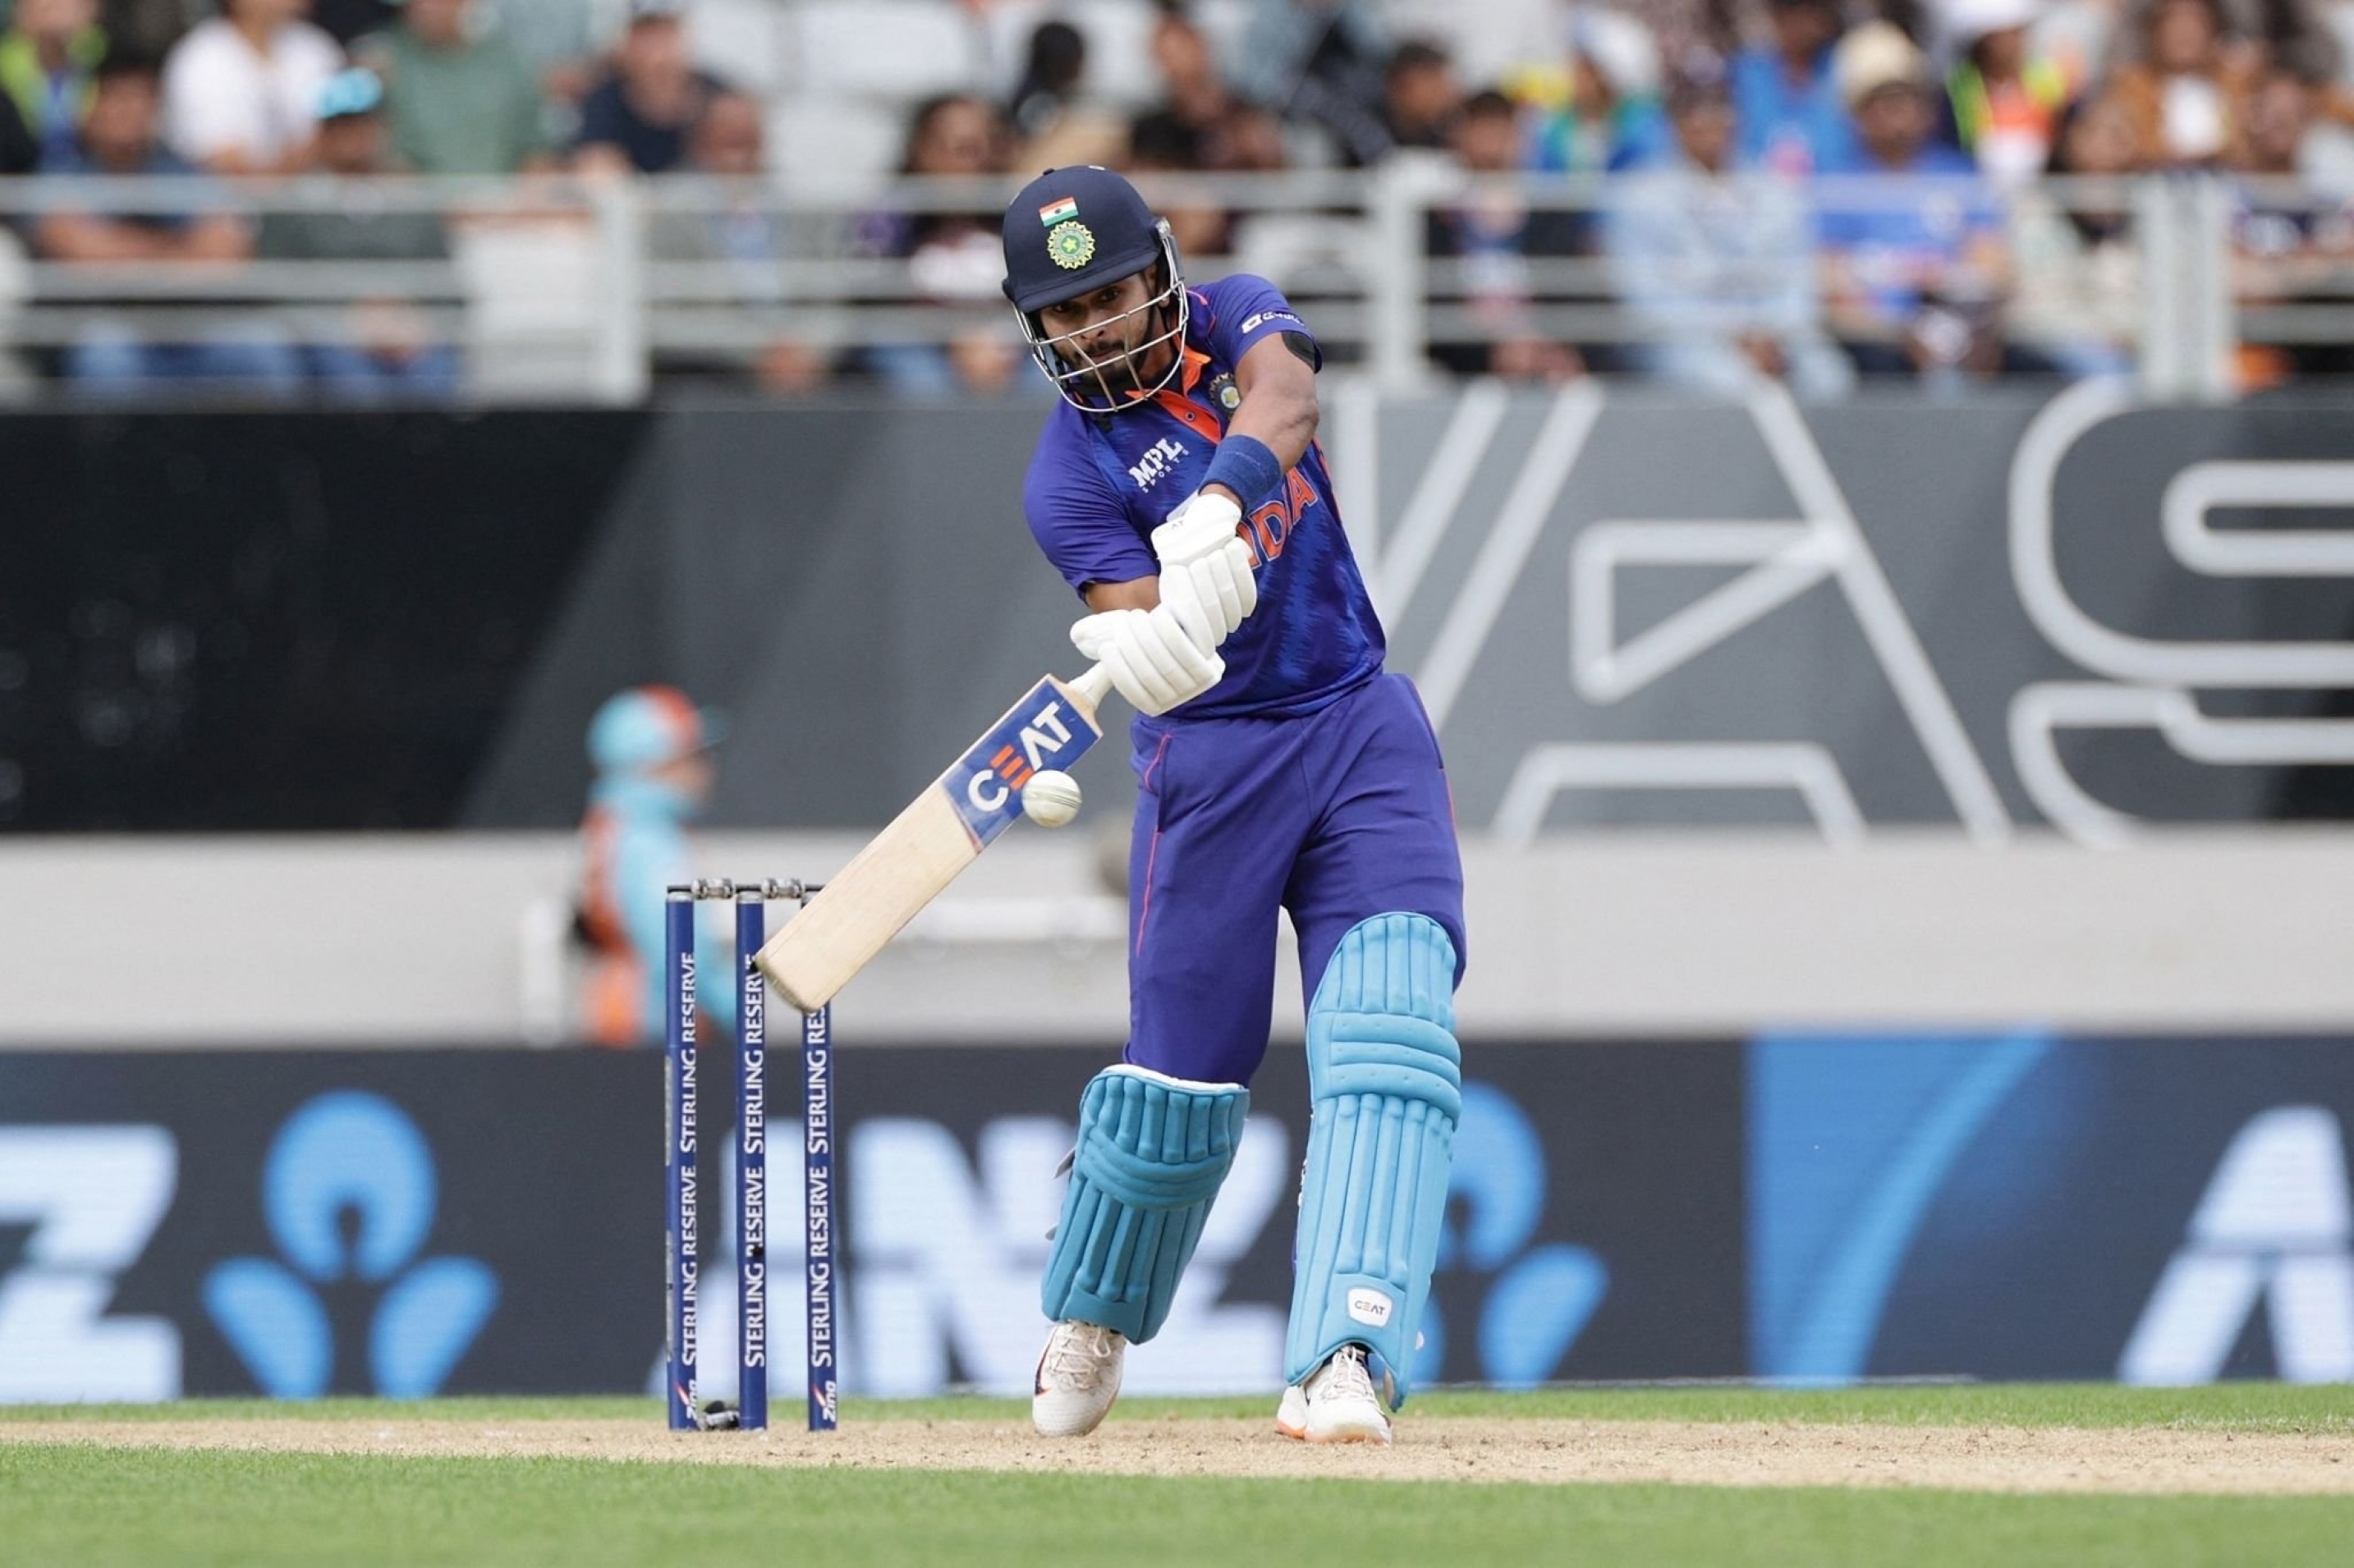 India Playing XI vs BAN: Rohit Sharma faces middle order conundrum as Rahul, Shreyas, Rishabh Pant fight for solitary spot as road to 2023 WC begins -Follow LIVE Updates